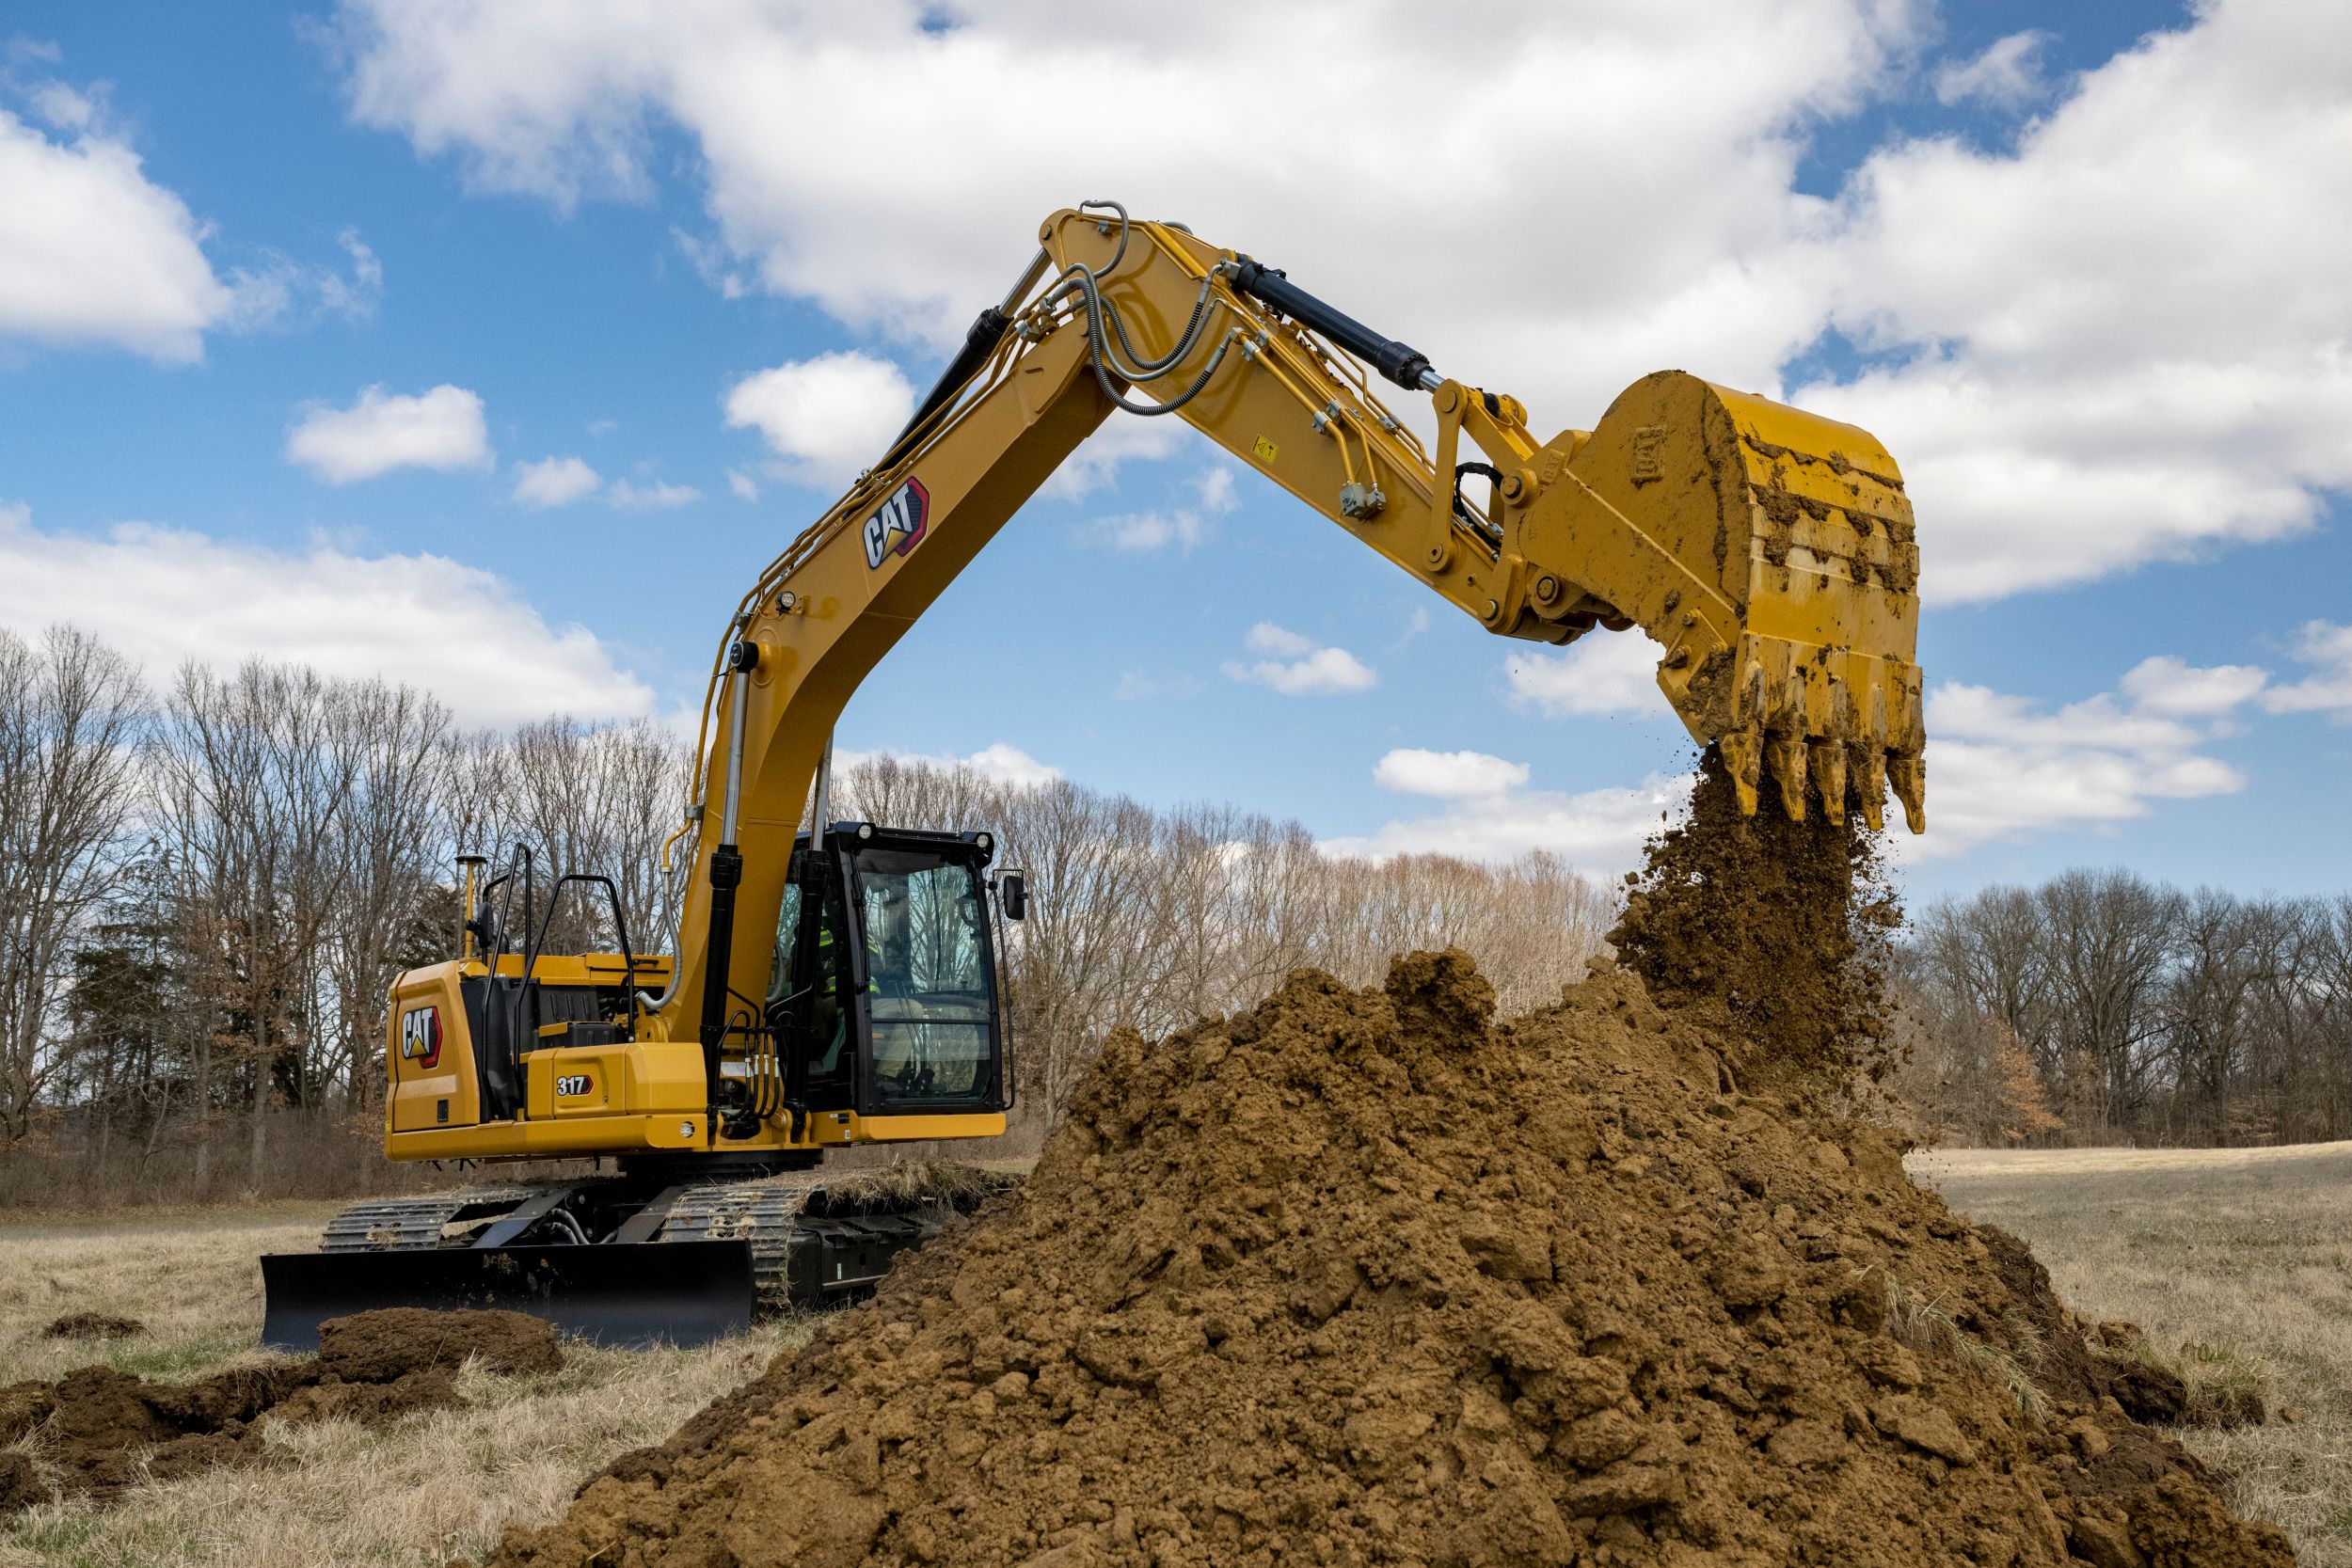 The 317 Hydraulic Excavator boosts productivity on your jobsite. Standard, easy-to-use Cat® technologies, performance upgrades, and low fuel and maintenance costs allow you to move material all day with speed and precision while keeping more money in your pocket.